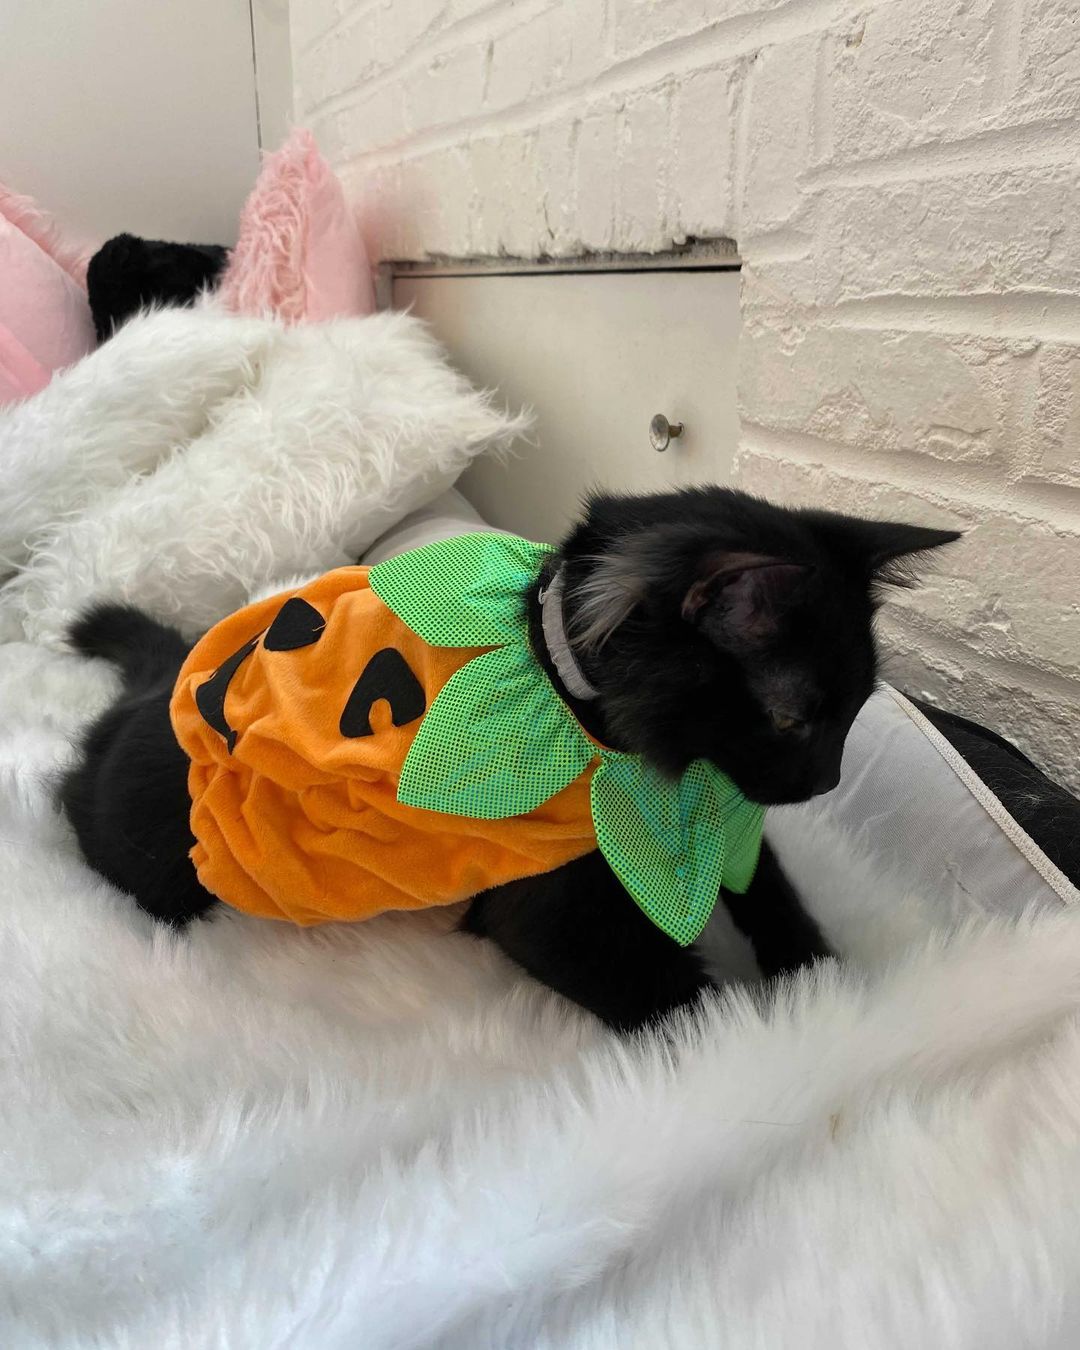 Happy Halloween from our <a target='_blank' href='https://www.instagram.com/explore/tags/adoptable/'>#adoptable</a> cats and dogs! <a target='_blank' href='https://www.instagram.com/explore/tags/adoptdontshop/'>#adoptdontshop</a> <a target='_blank' href='https://www.instagram.com/explore/tags/happyhalloween/'>#happyhalloween</a> <a target='_blank' href='https://www.instagram.com/explore/tags/spookyseason/'>#spookyseason</a> <a target='_blank' href='https://www.instagram.com/explore/tags/catsofinstagram/'>#catsofinstagram</a> <a target='_blank' href='https://www.instagram.com/explore/tags/dogsofinstagram/'>#dogsofinstagram</a>